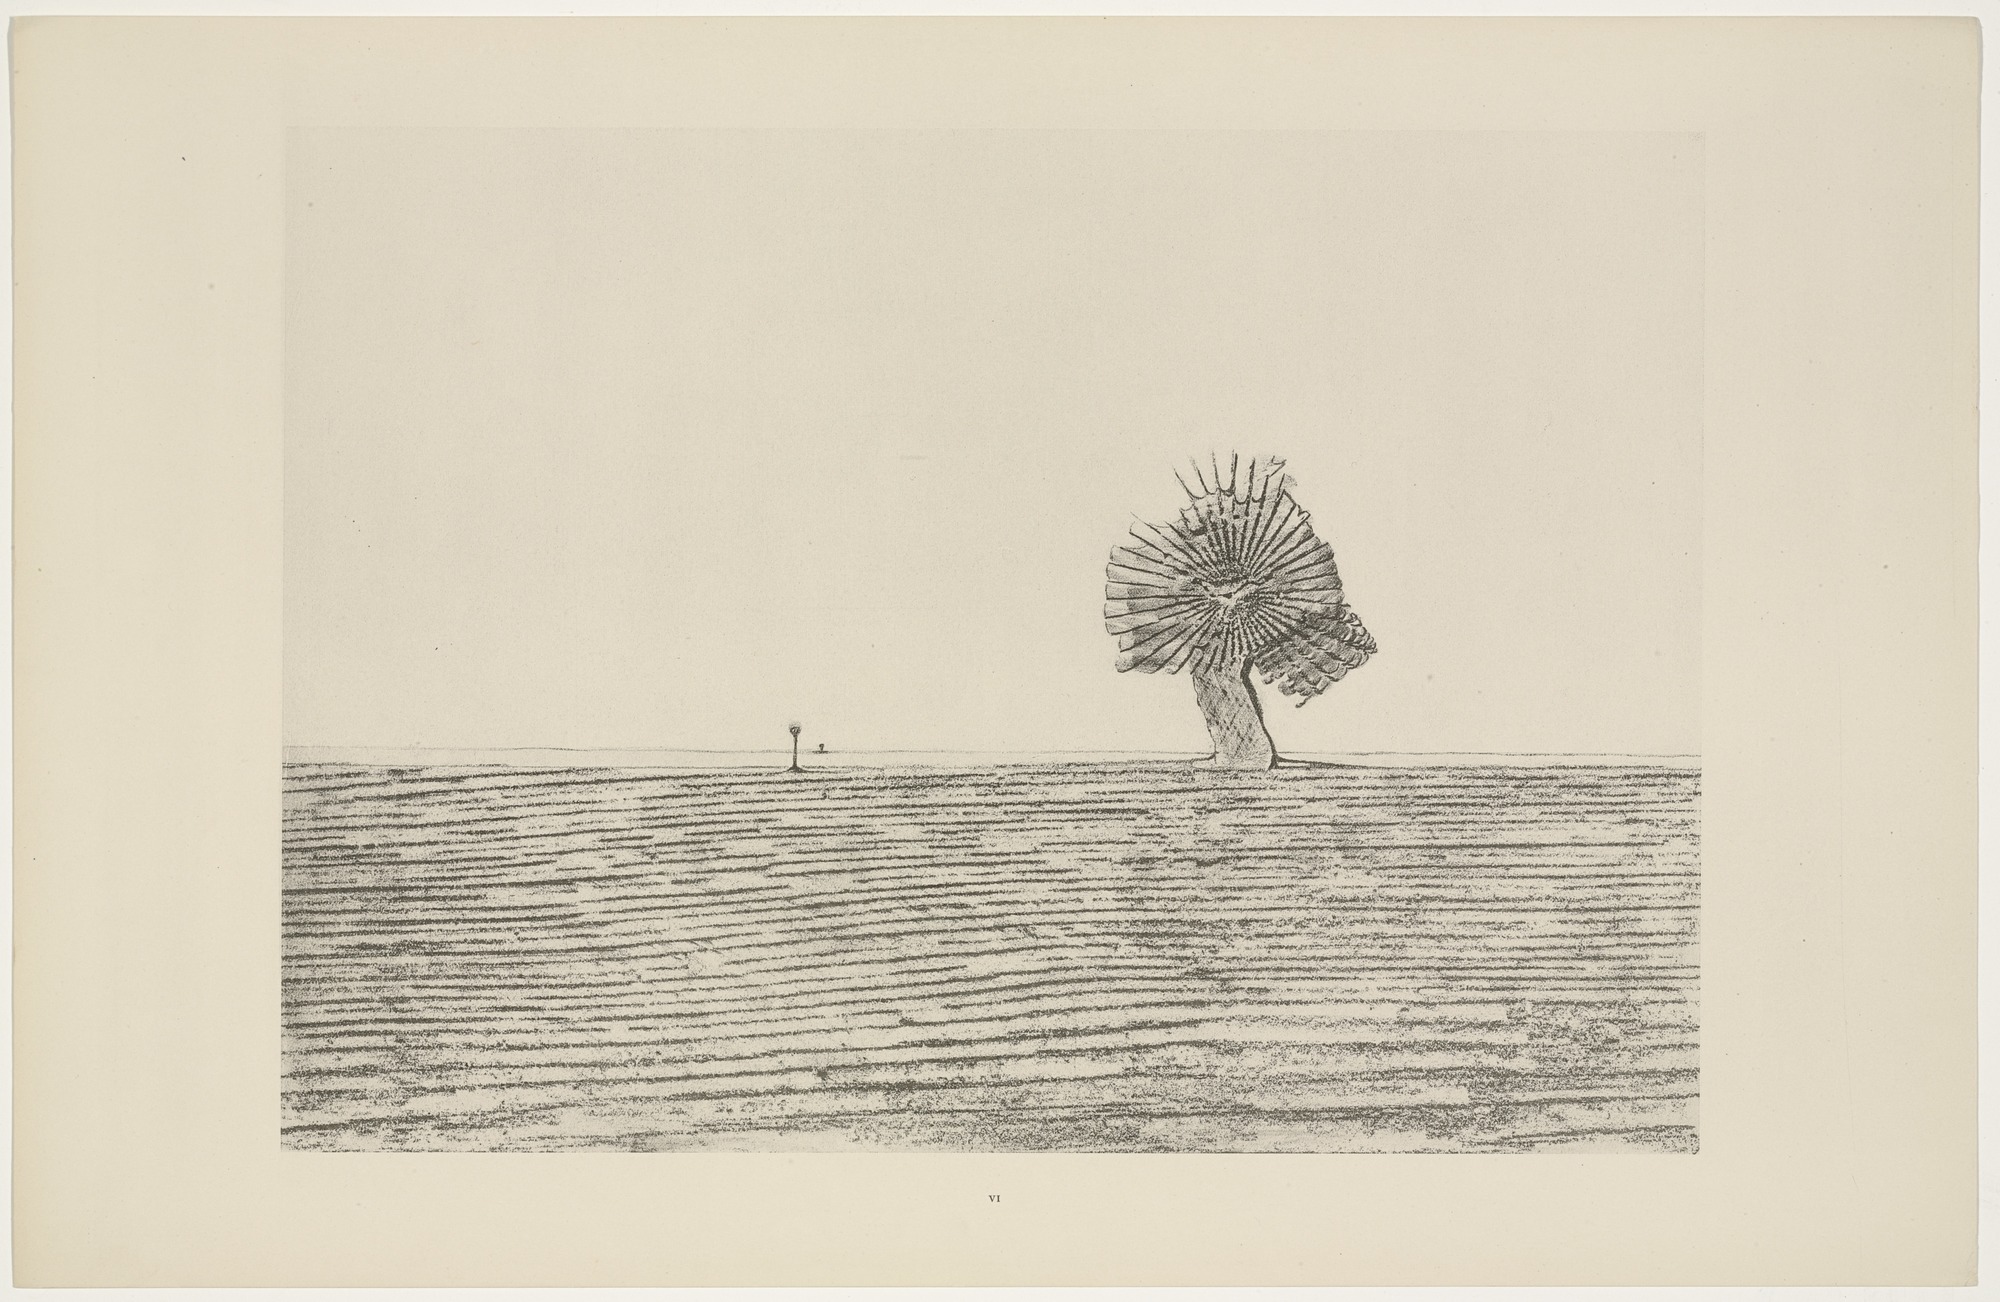 Max Ernst, The Pampas from Natural History, published 1926 (MoMA)